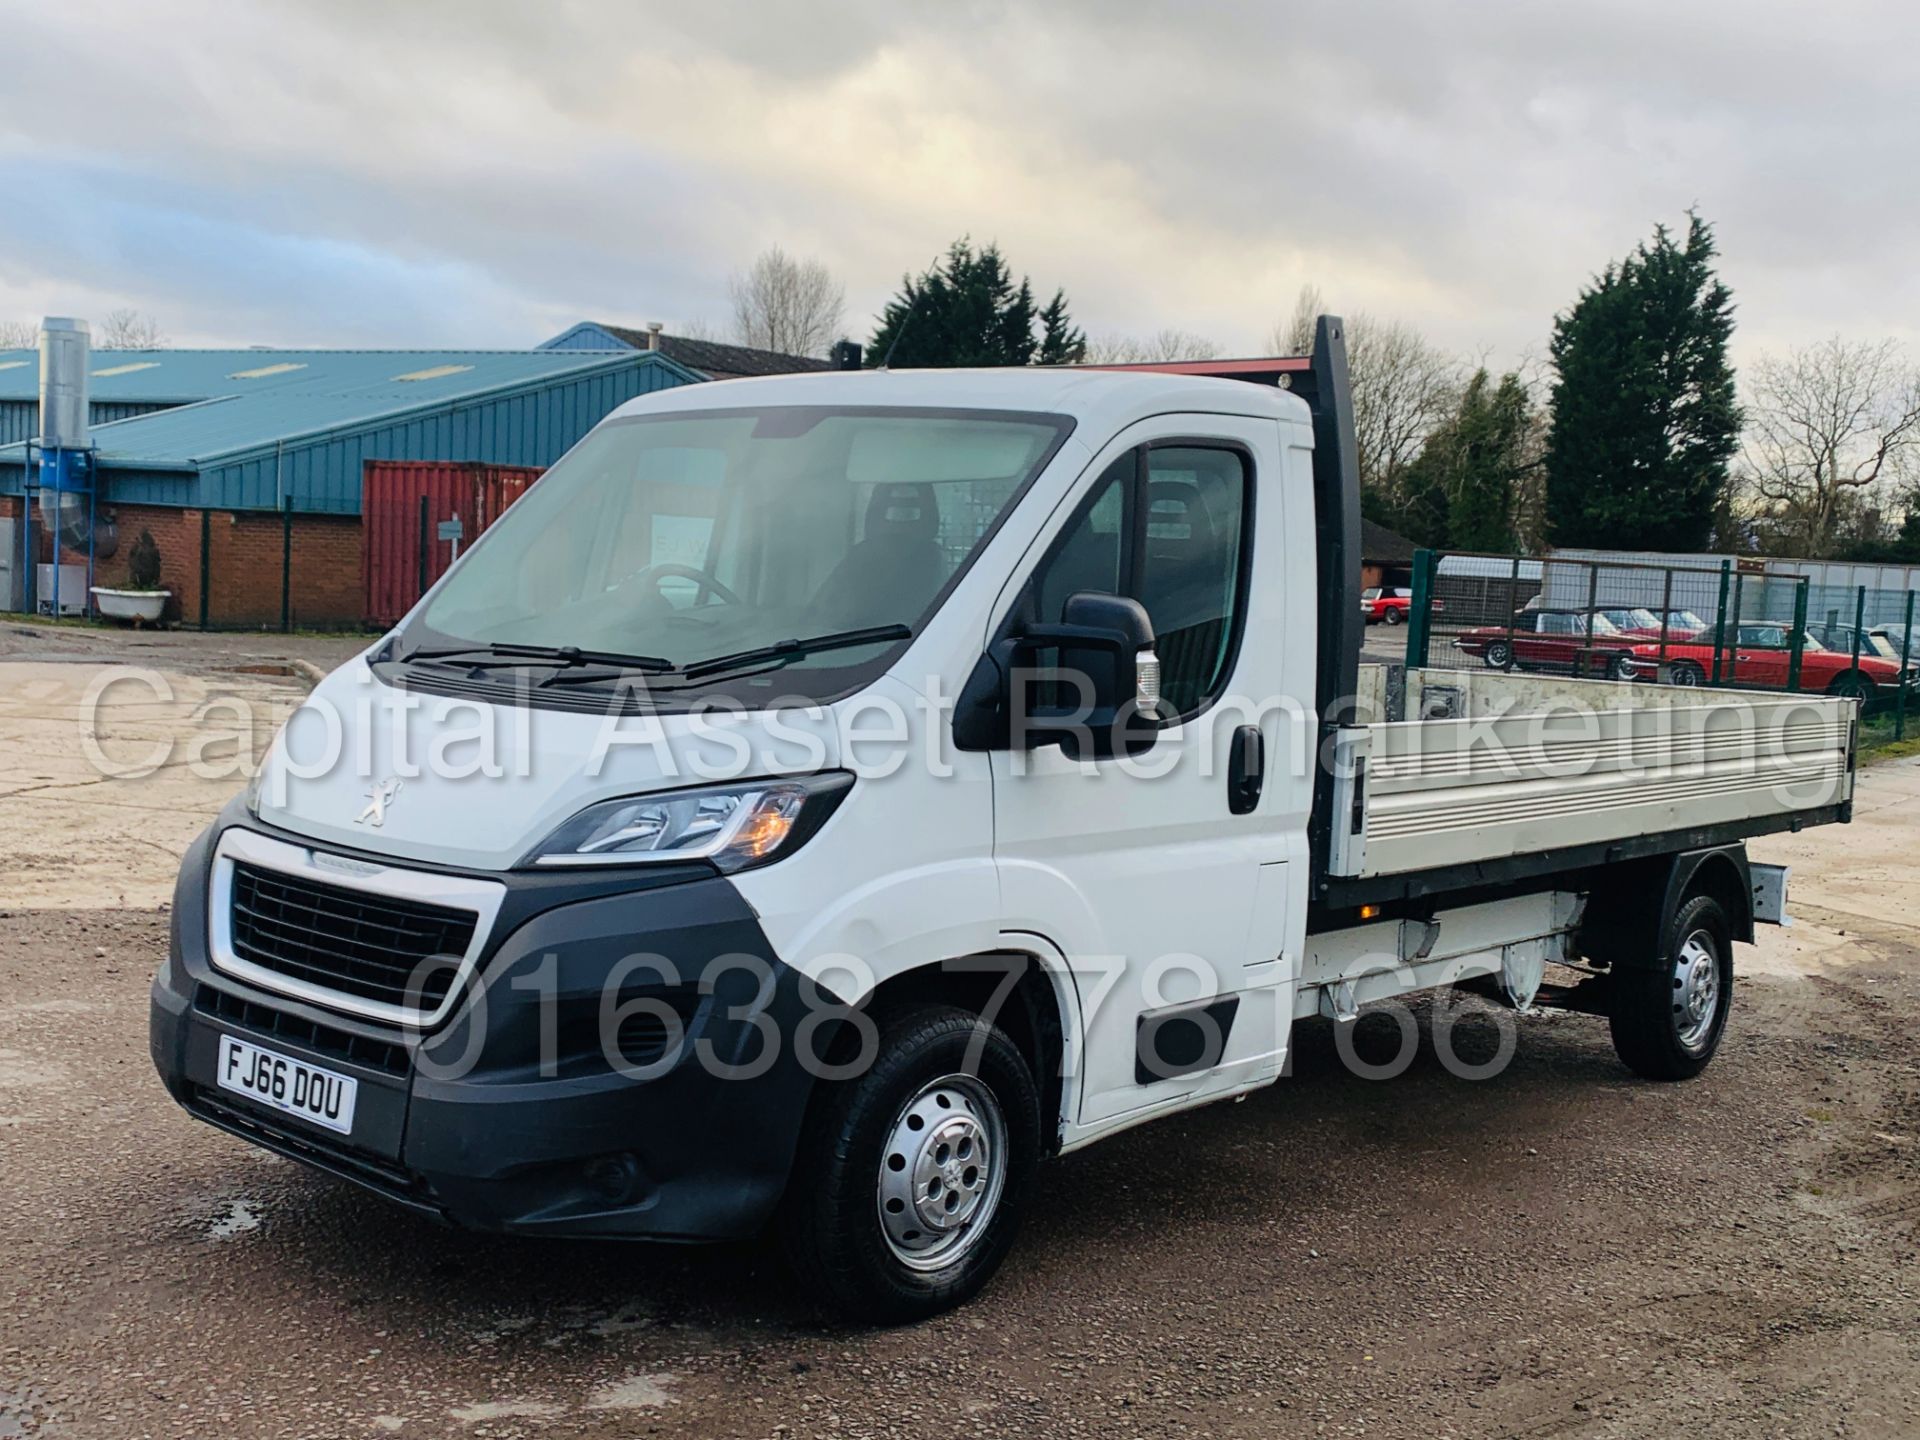 PEUGEOT BOXER *LWB - DROPSIDE TRUCK* (2017 - EURO 6 MODEL) '2.0 HDI - 6 SPEED' *ONLY 45,000 MILES* - Image 6 of 35